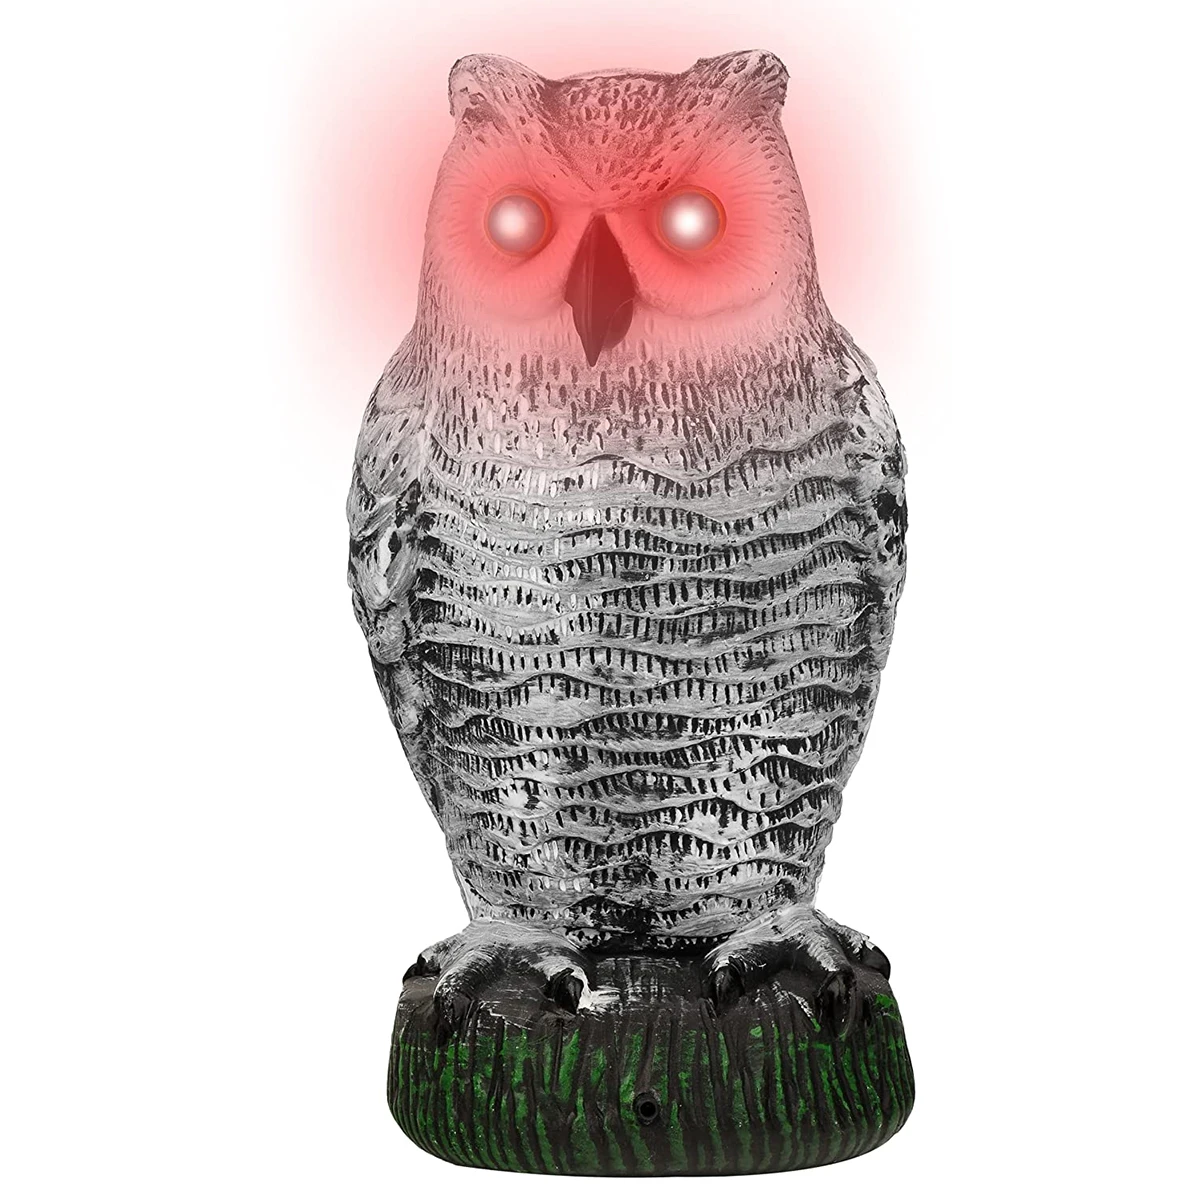 

Owl Decoy Waterproof Fake Owl Scarecrow with Flashing Eyes and Frightening Sound Lifelike Battery Powered Owl Statue Bird